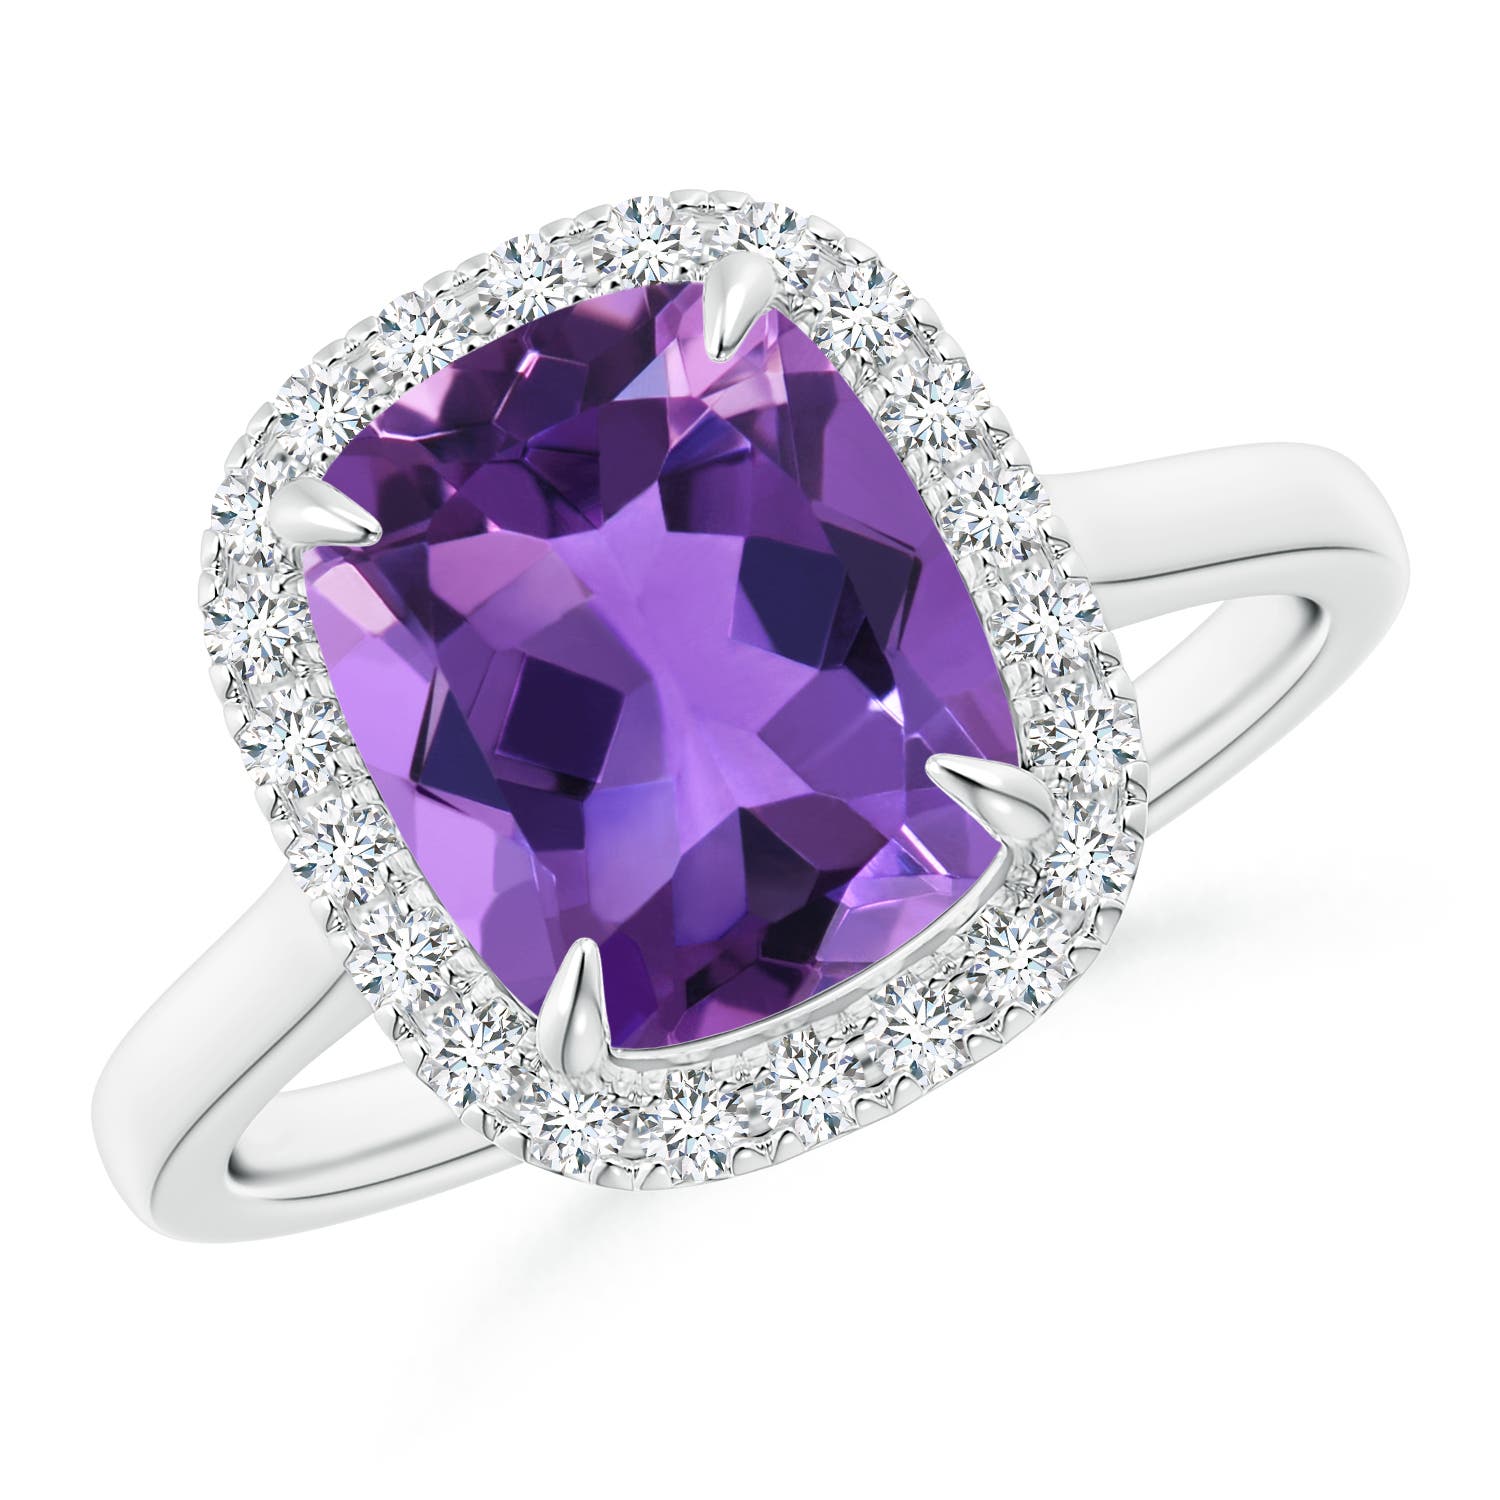 AAA - Amethyst / 3.01 CT / 14 KT White Gold